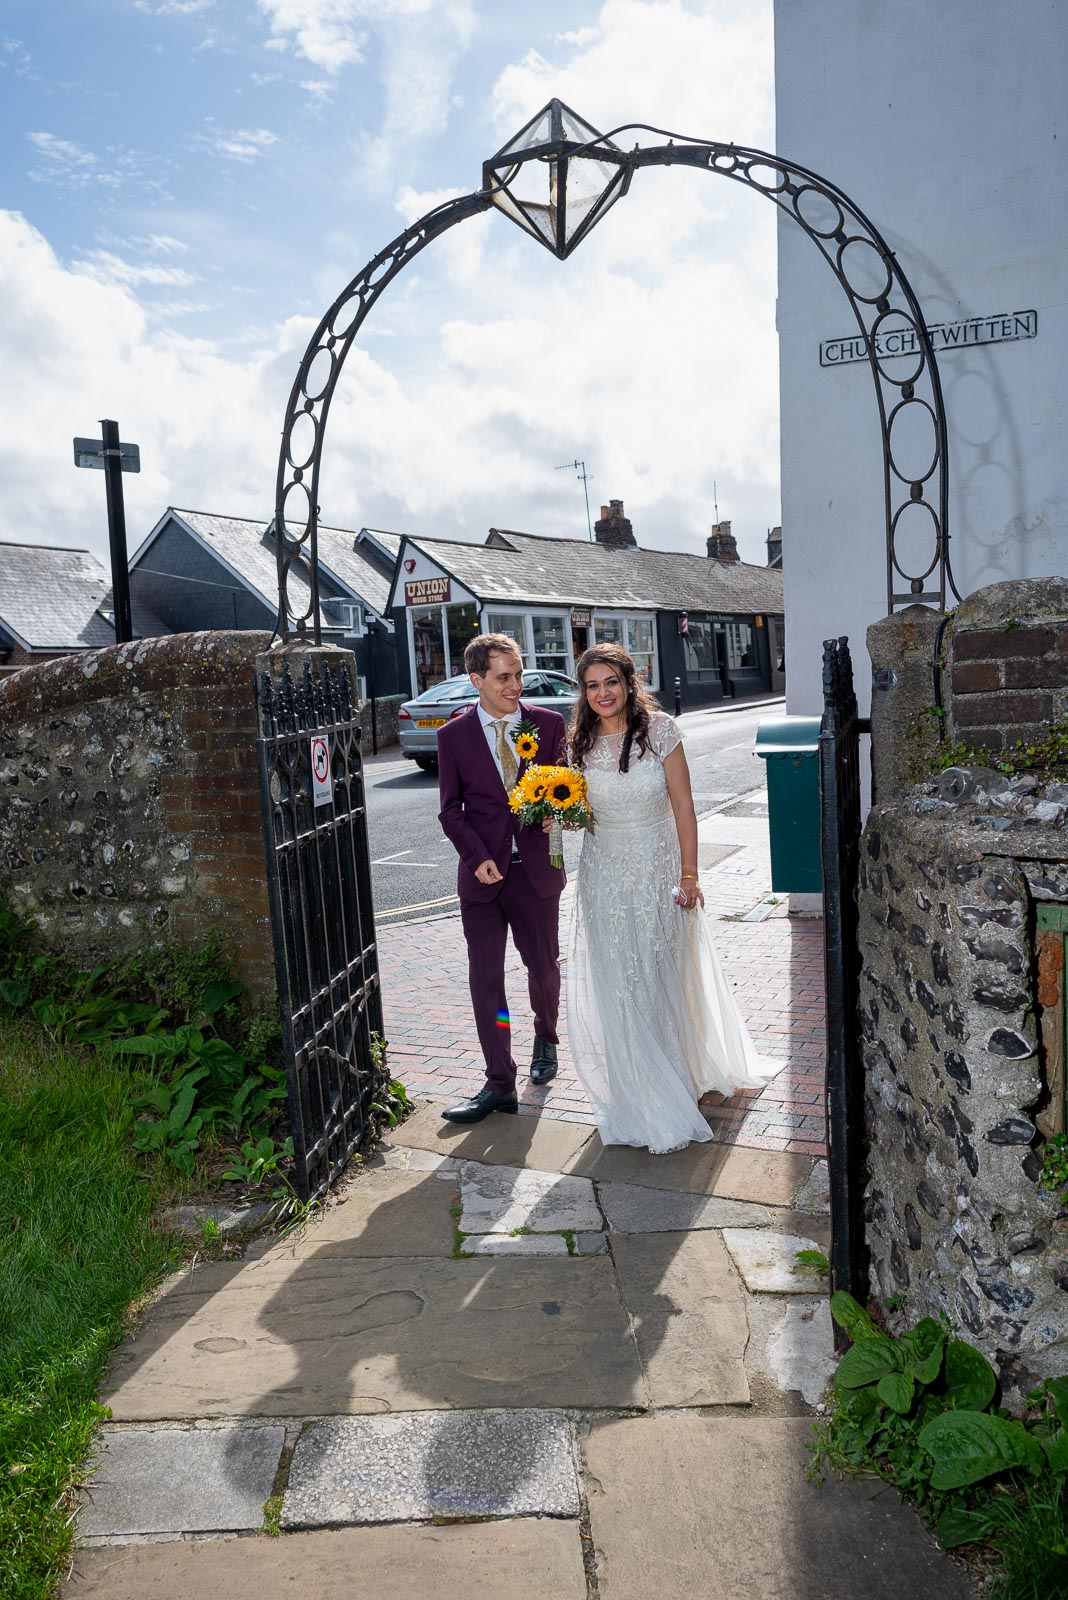 Ashley and Anjana walk in the front gate at Lewes All Saints Centre before their Wedding Reception.